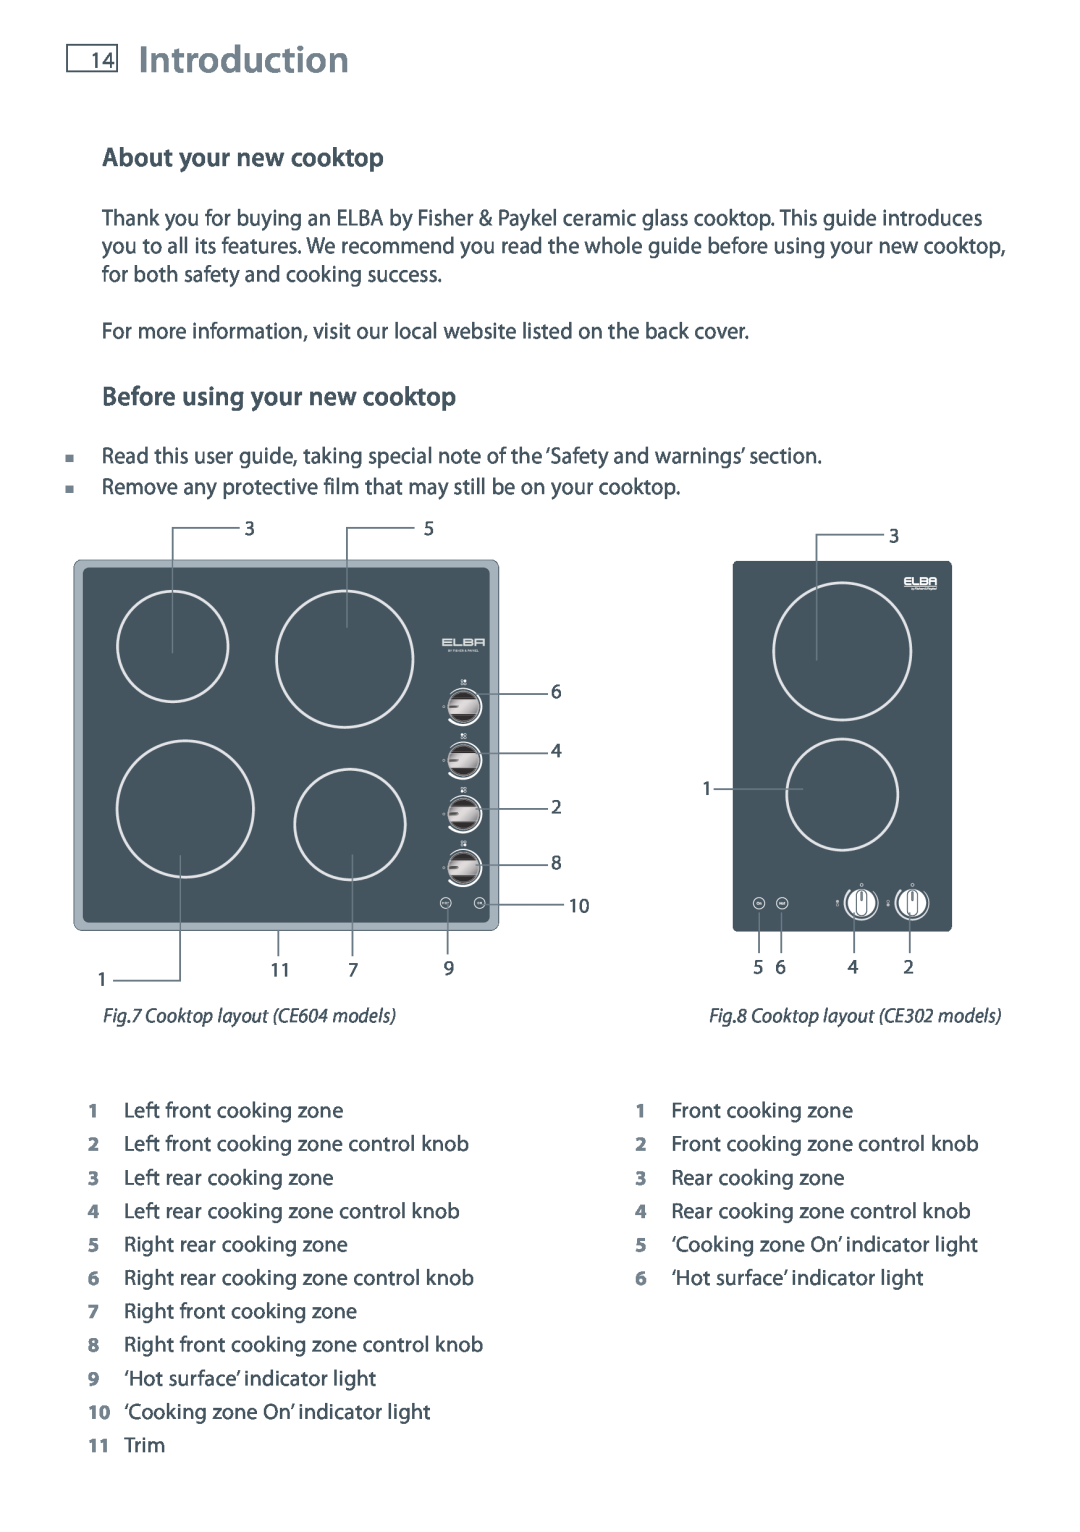 Fisher & Paykel CE302, CE604 installation instructions Introduction, About your new cooktop, Before using your new cooktop 